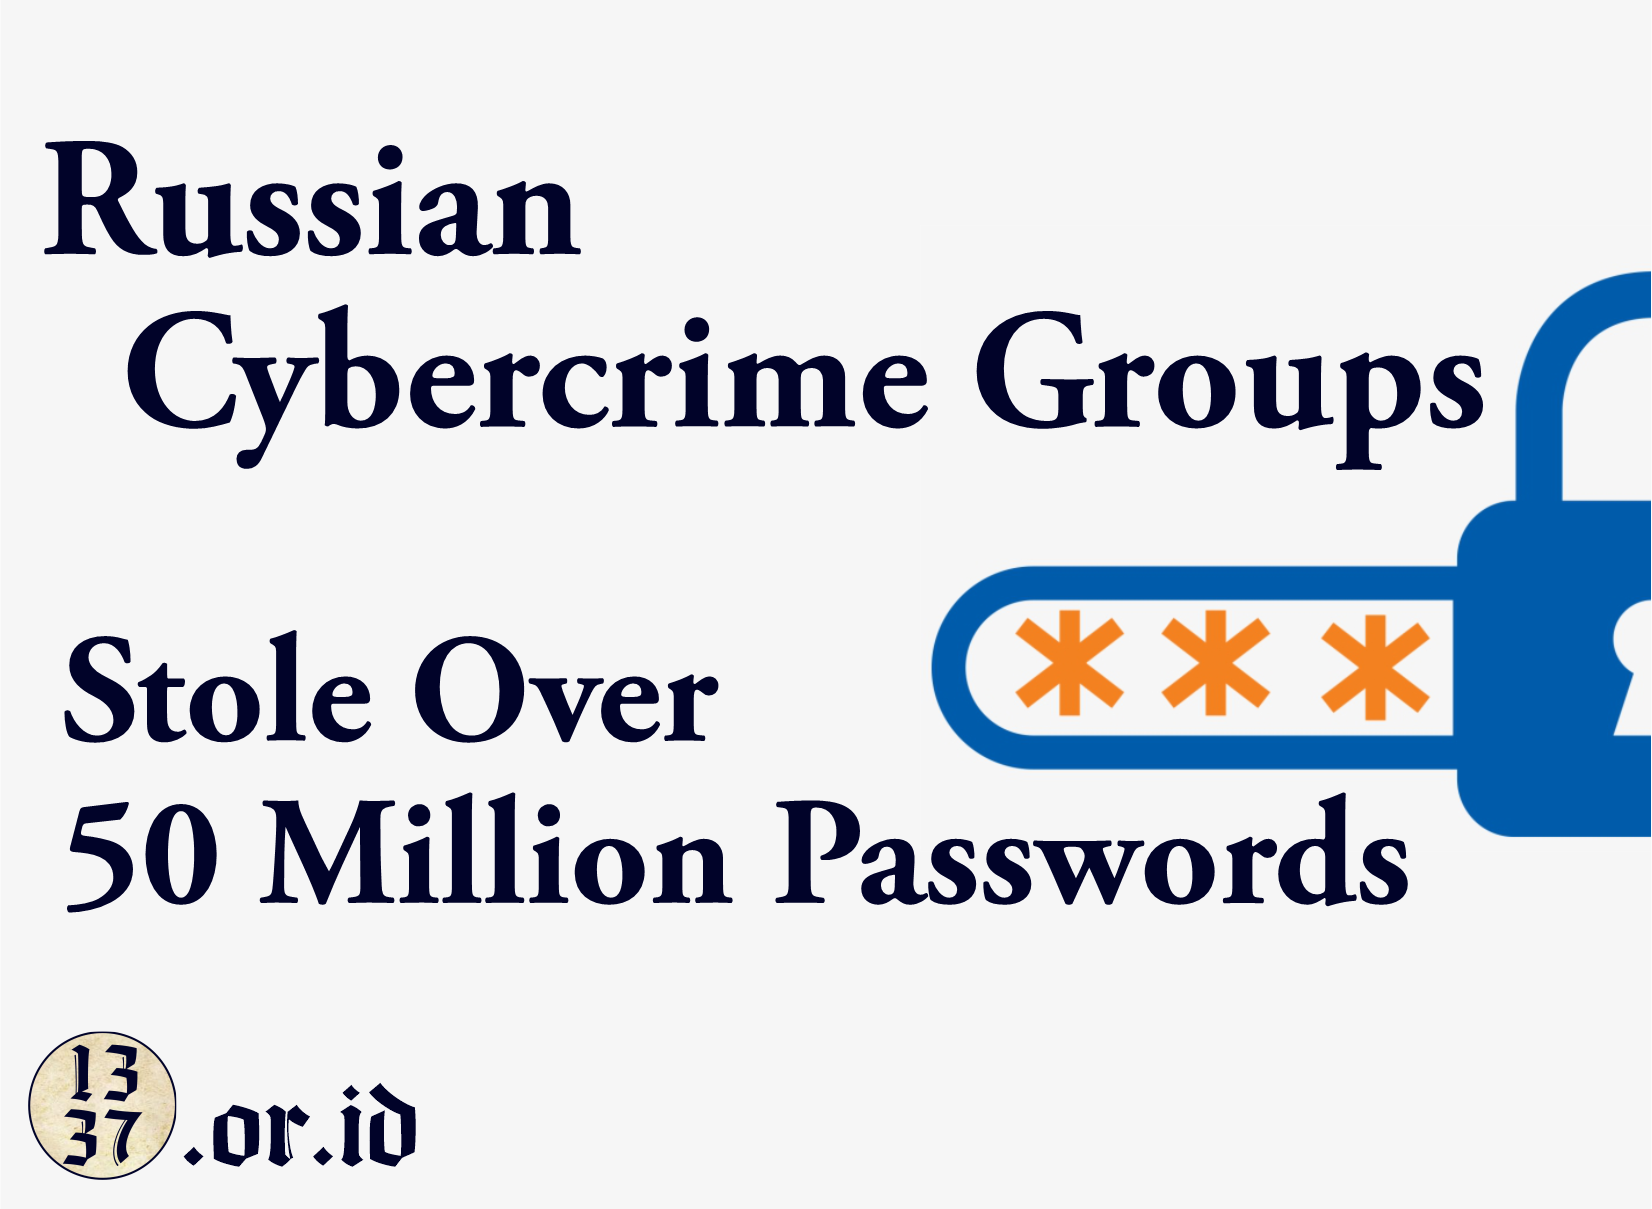 Russian Cybercrime Groups Stole Over 50 Million Passwords with Stealer Malware